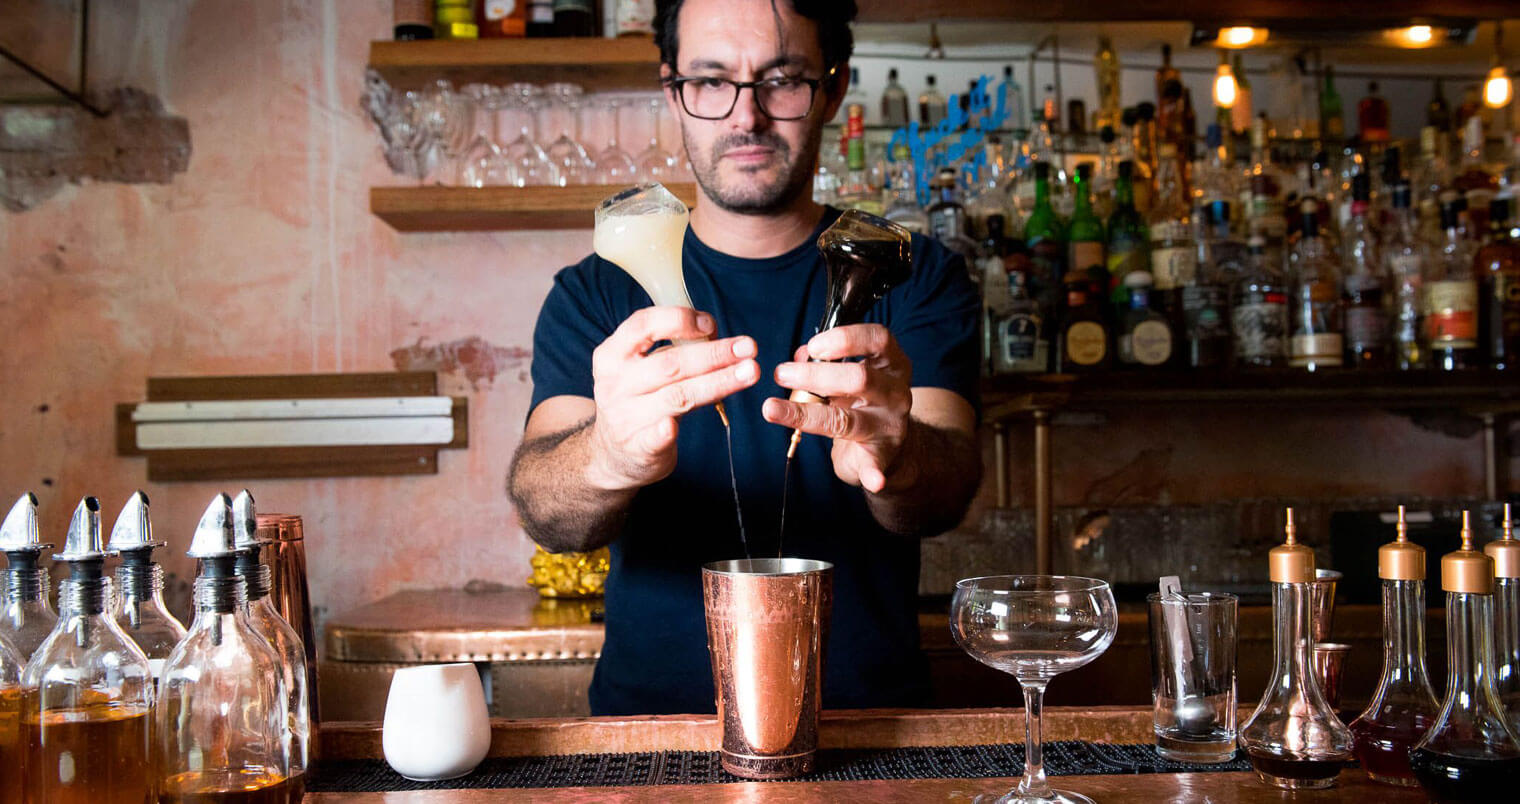 Federico Avila mixing a cocktail behind the bar, featured image